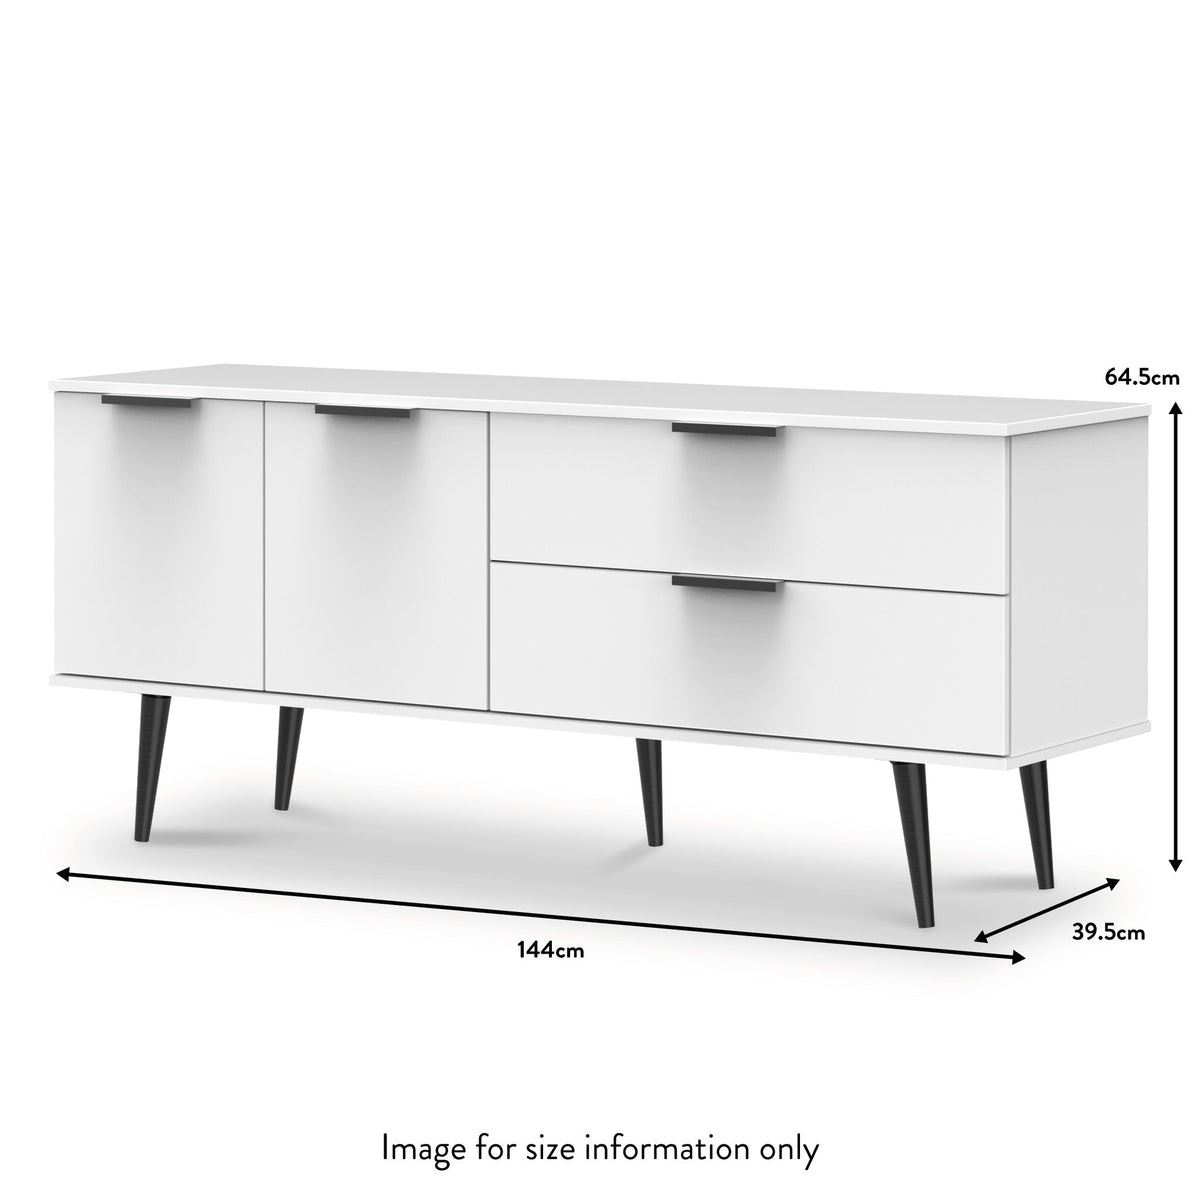 Asher White 2 Drawer 2 Door Sideboard Cabinet dimensions